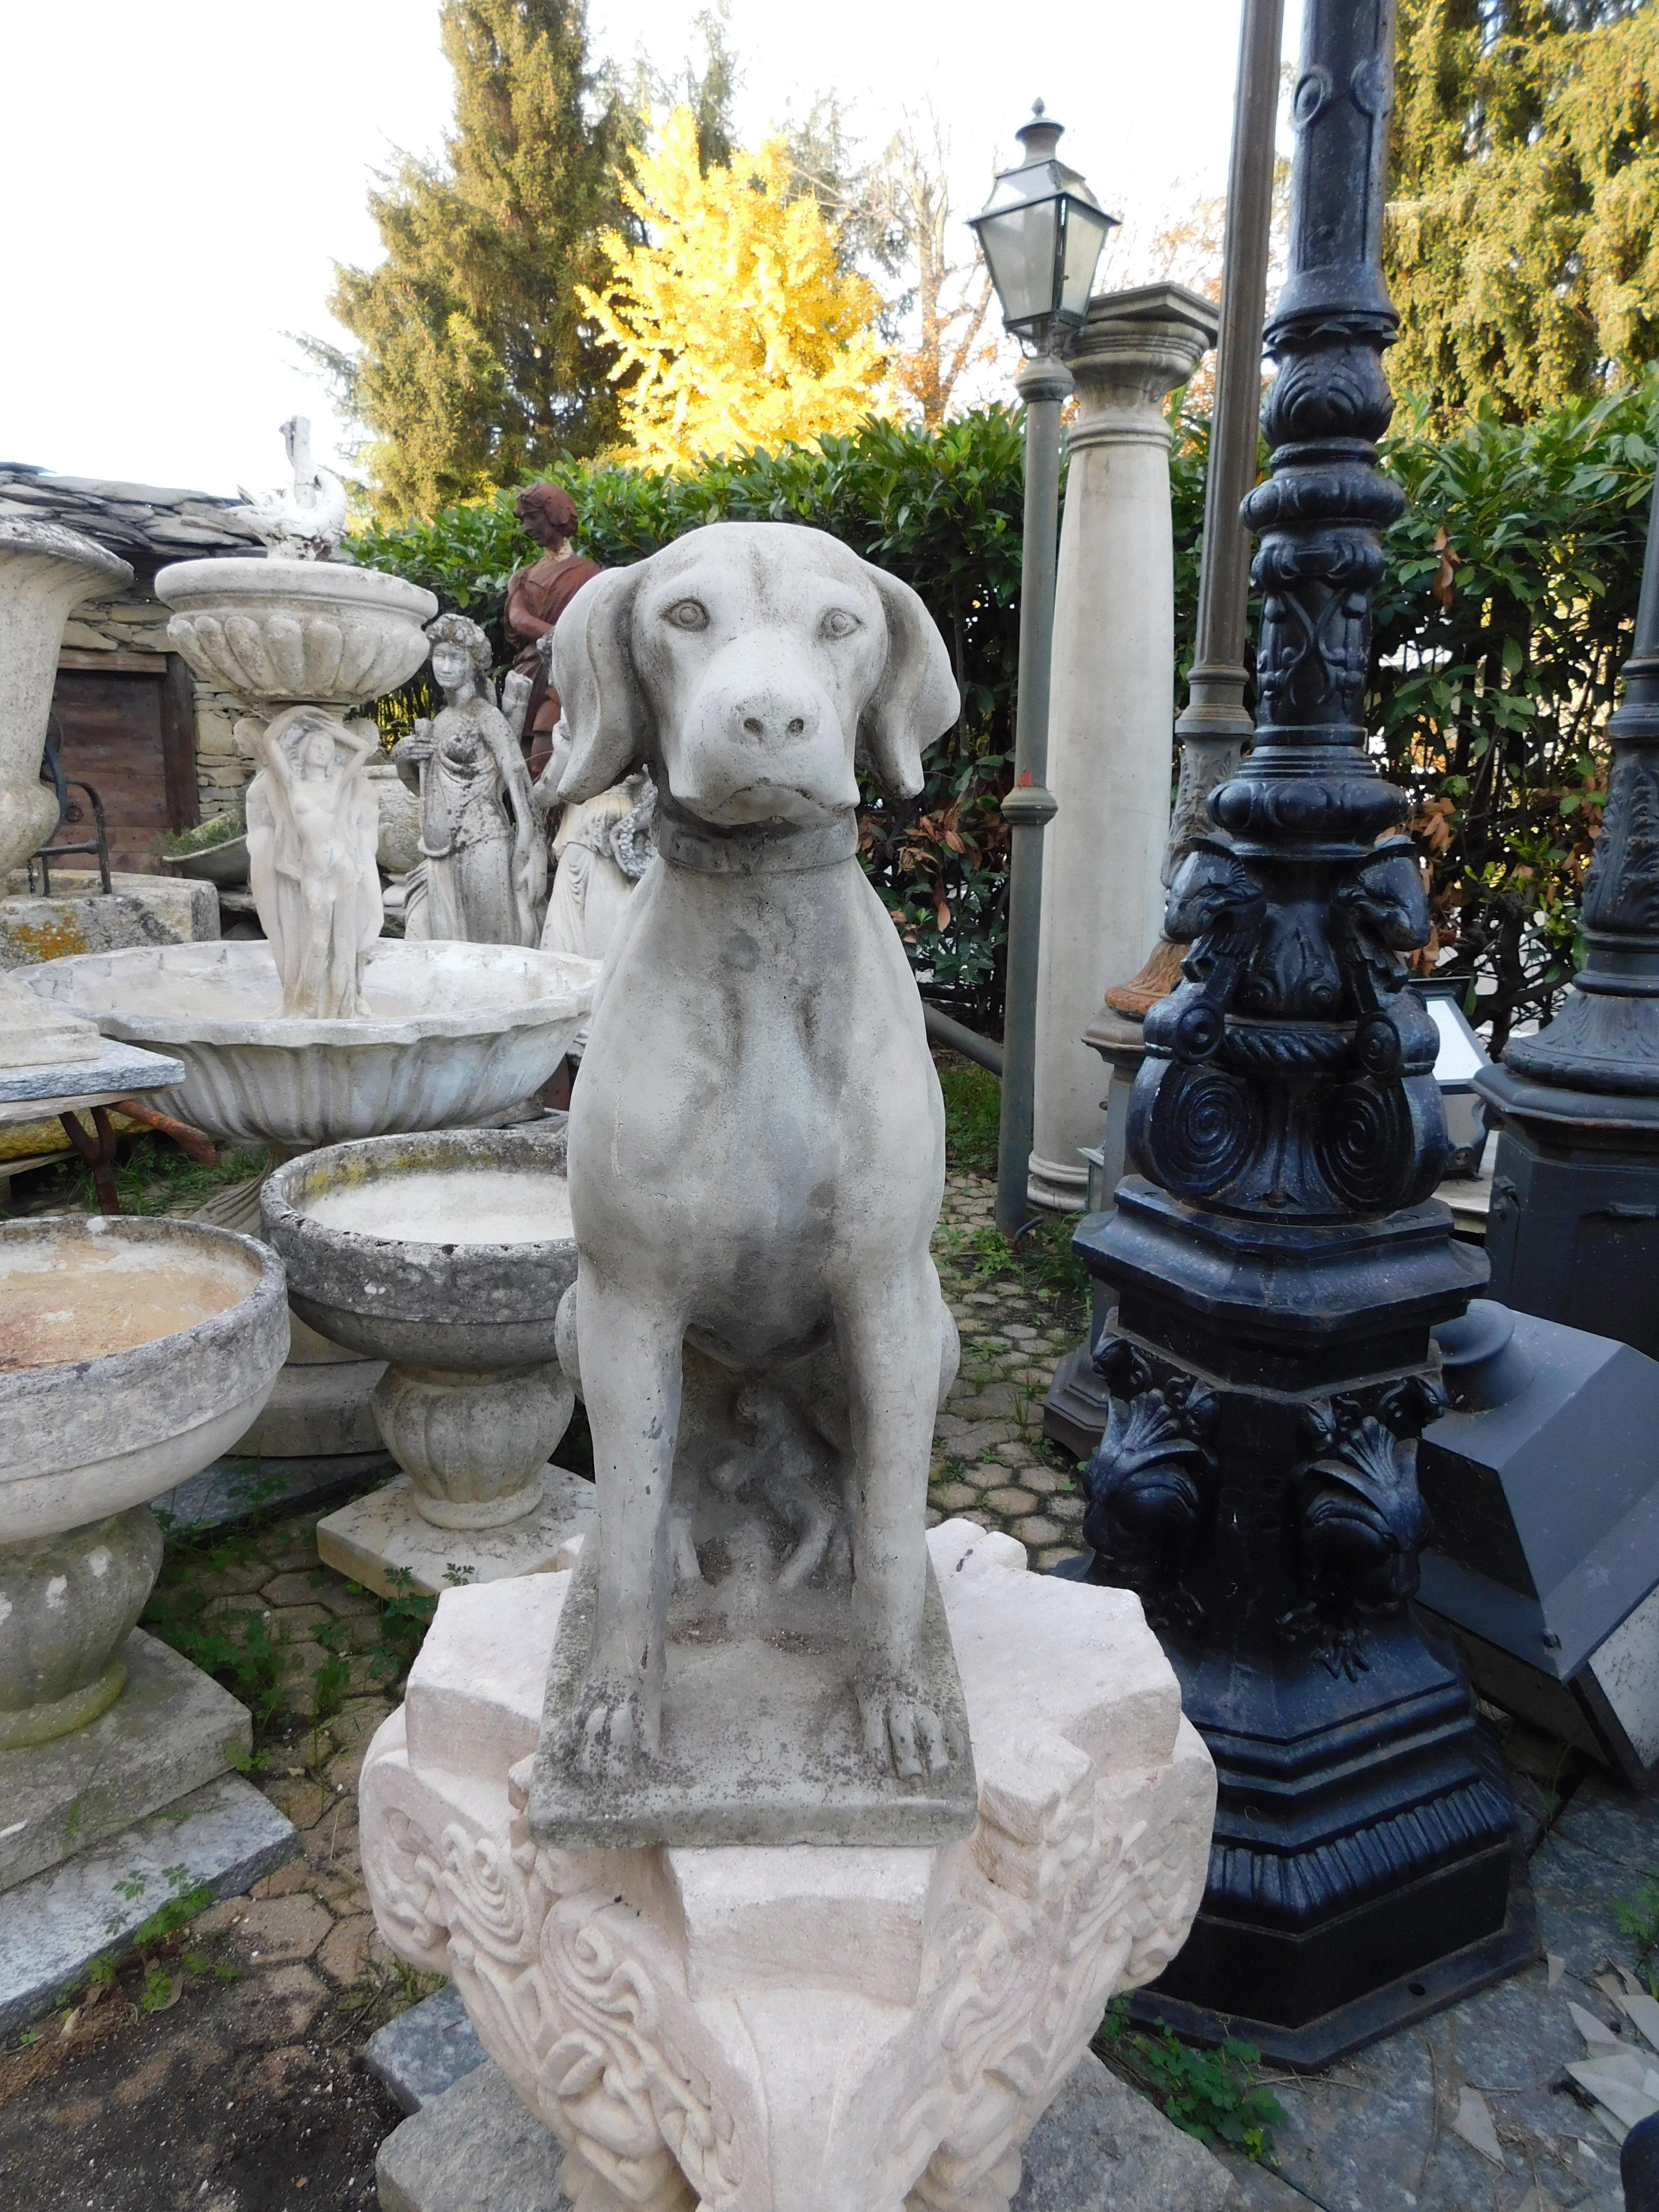 Vintage concrete dog statue, both indoors and outdoors, as garden furniture or in a prestigious entrance, built in Italy in the second half of the 1900s, maximum size cm W 25 x H 72 x D 50